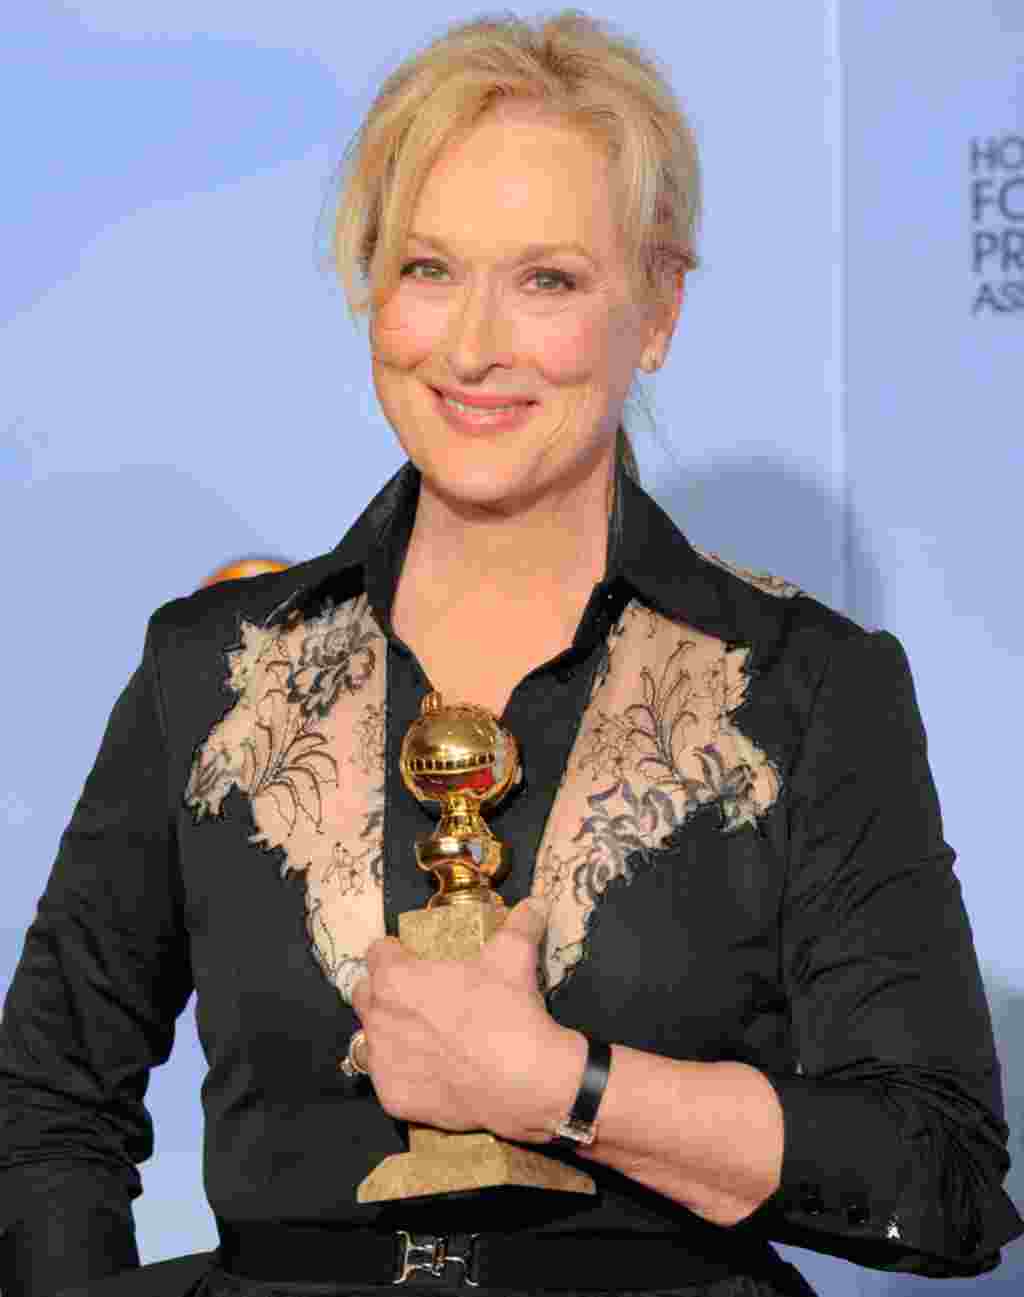 Actress Meryl Streep poses backstage with the award for Best Actress in a Motion Picture Drama for "The Iron Lady" during the 69th Annual Golden Globe Awards on January 15, 2012, in Los Angeles. (AP)